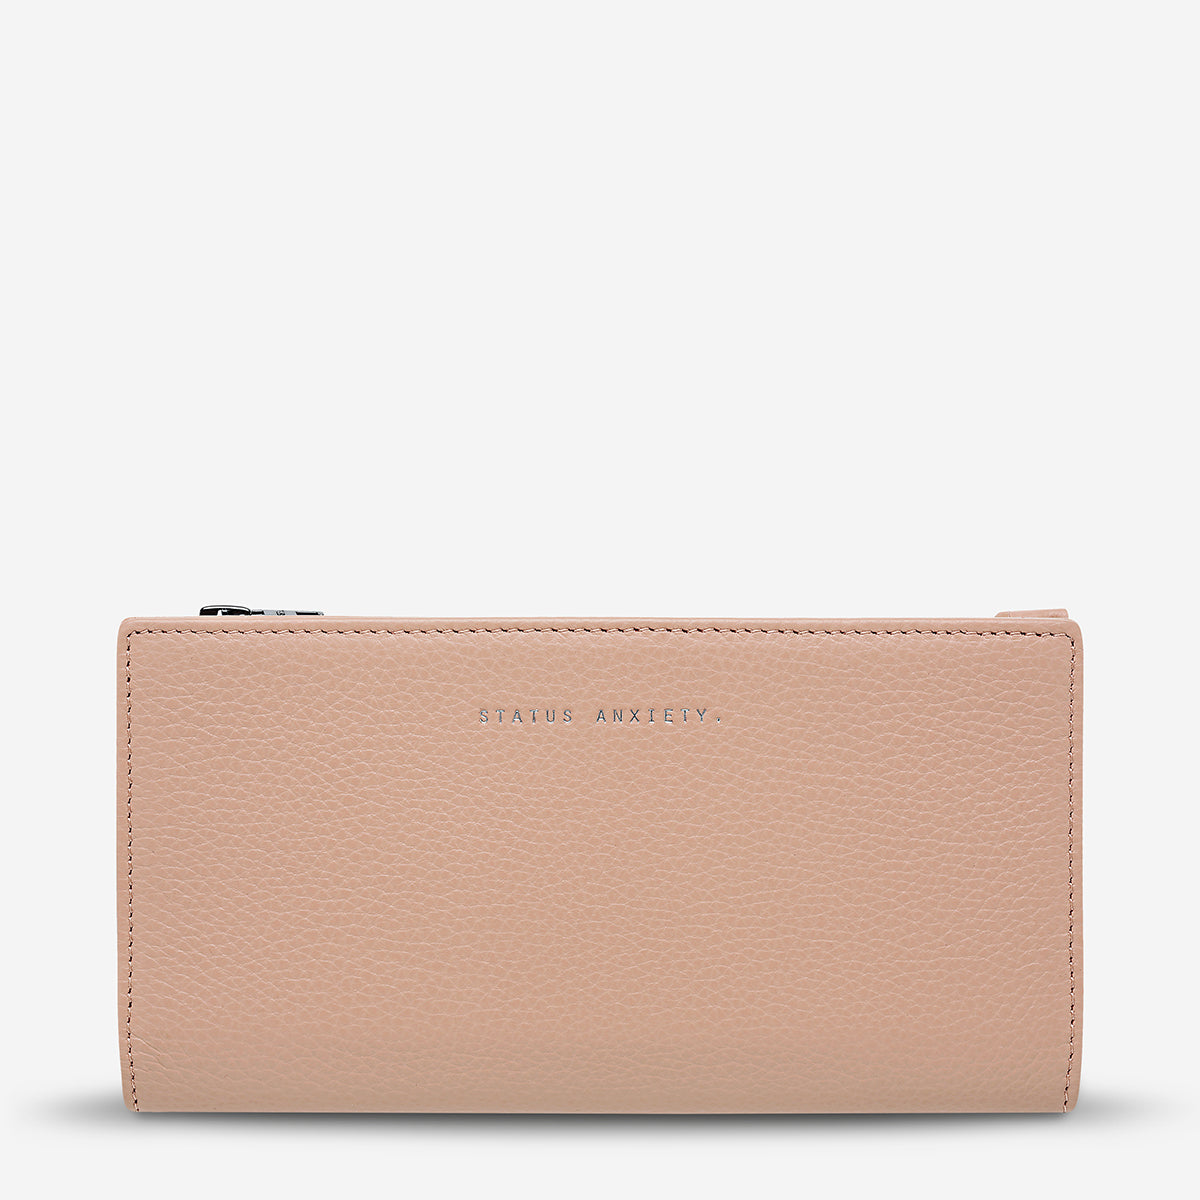 Status Anxiety Old Flame Women's Leather Wallet Dusty Pink